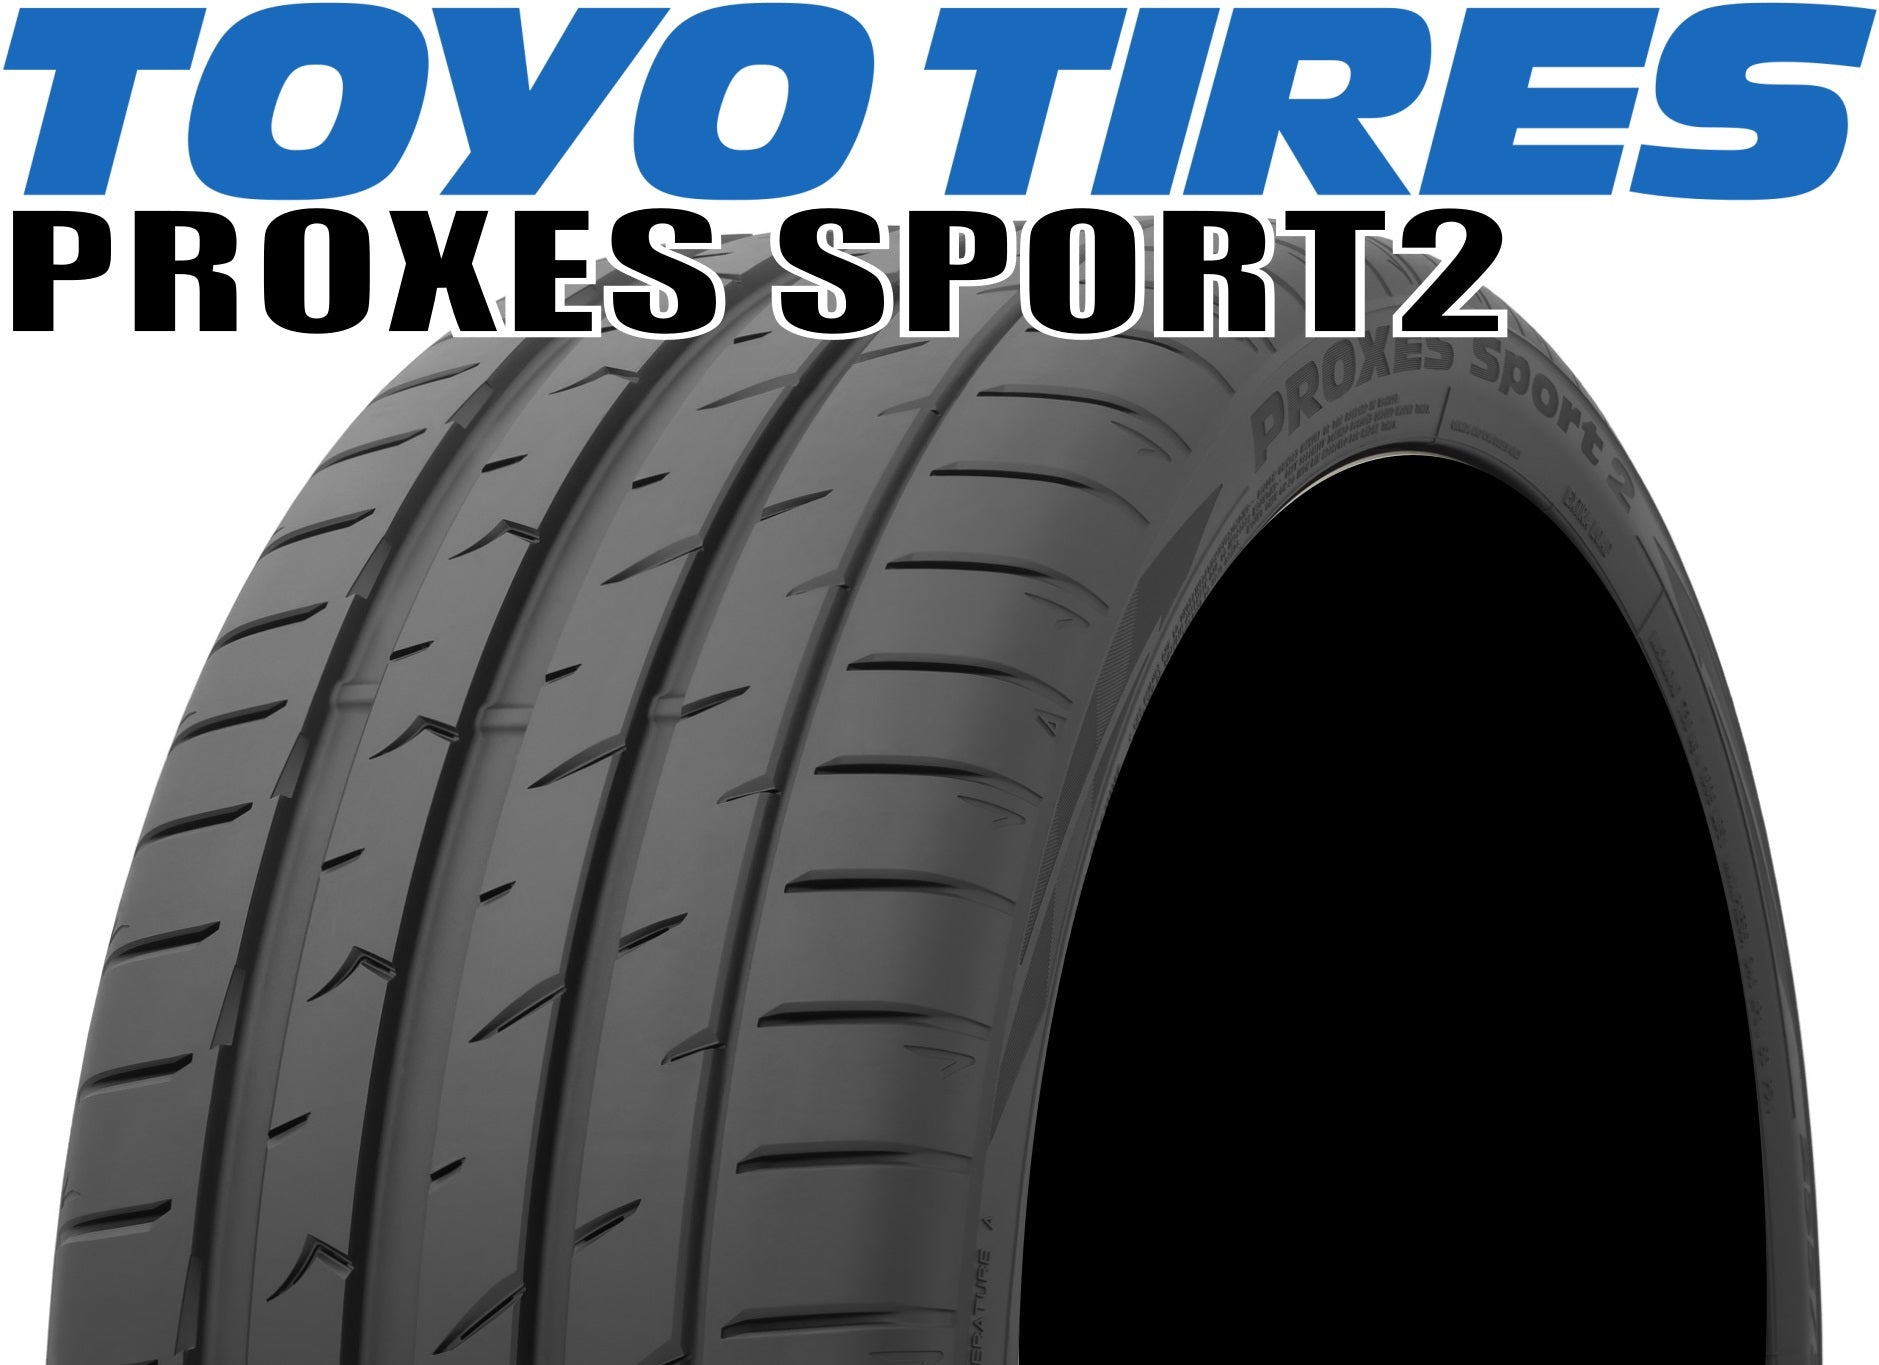 TOYO TIRES PROXES SPORT2(トーヨー プロクセススポーツ) 225/55R17 101Y XL (225/55-17